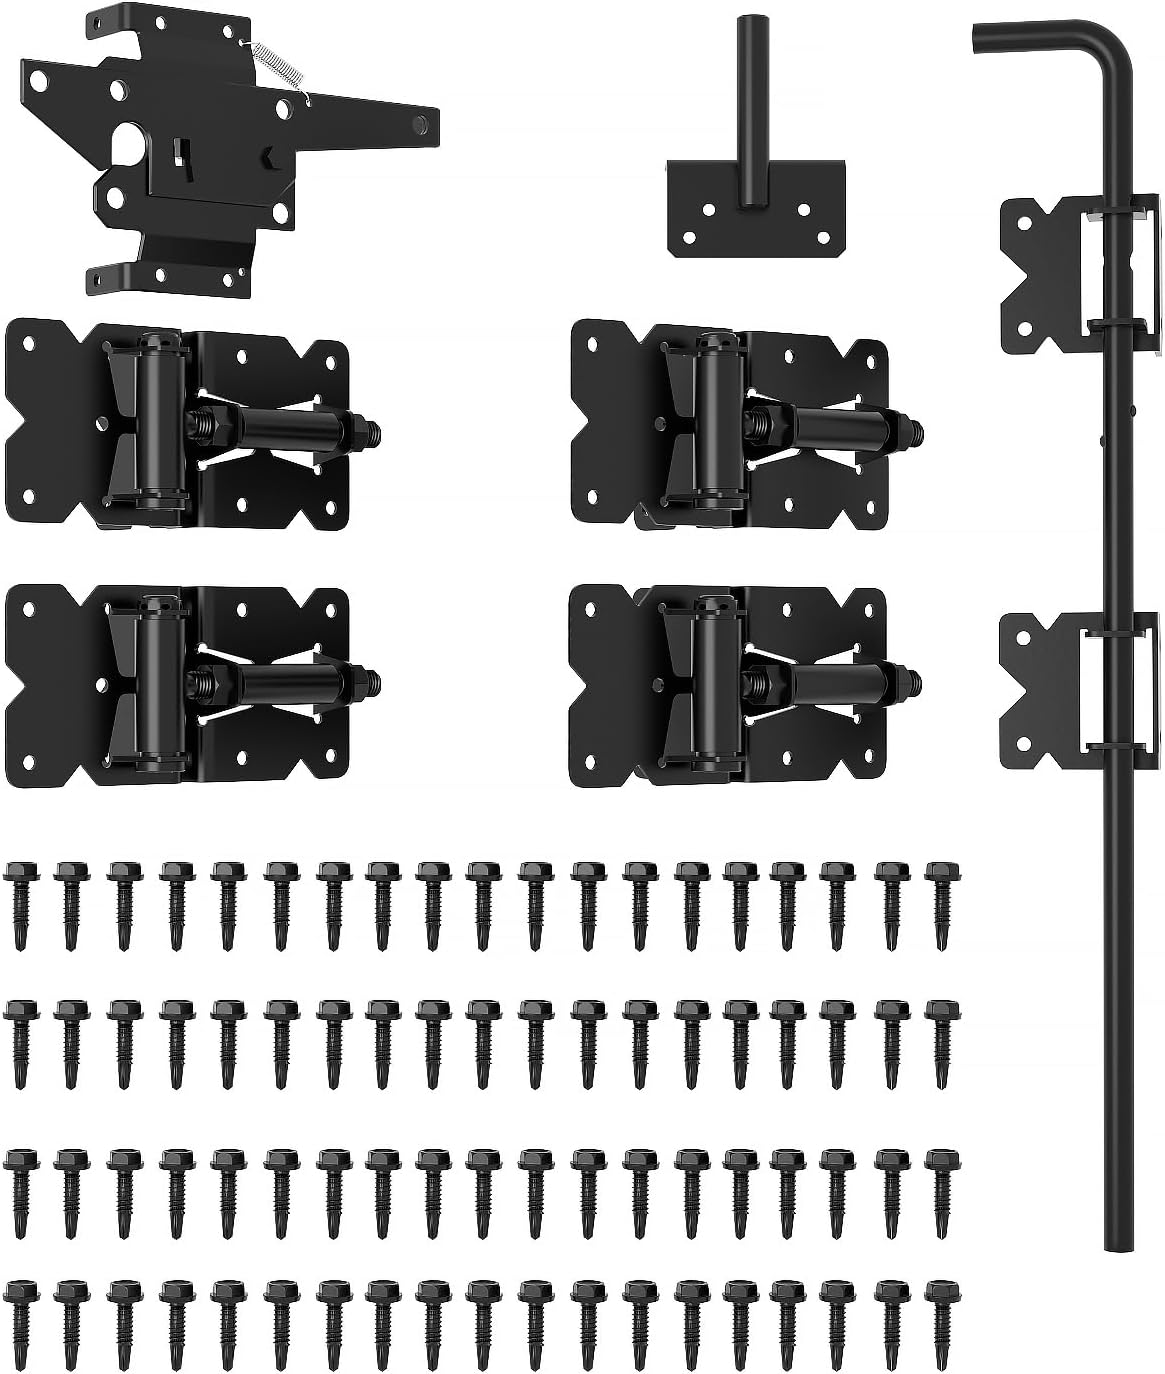 SANKEYTEW Self Closing Fence Gate Hinges, Latch, 24.01&#34; Drop Rod - Easy to Install, Black Plastic Spraying - Extra-Thick Rod for Wood, Vinyl, Garden, Fence Gates - Safe, Secure, Sturdy, Durable(ZTWJ)